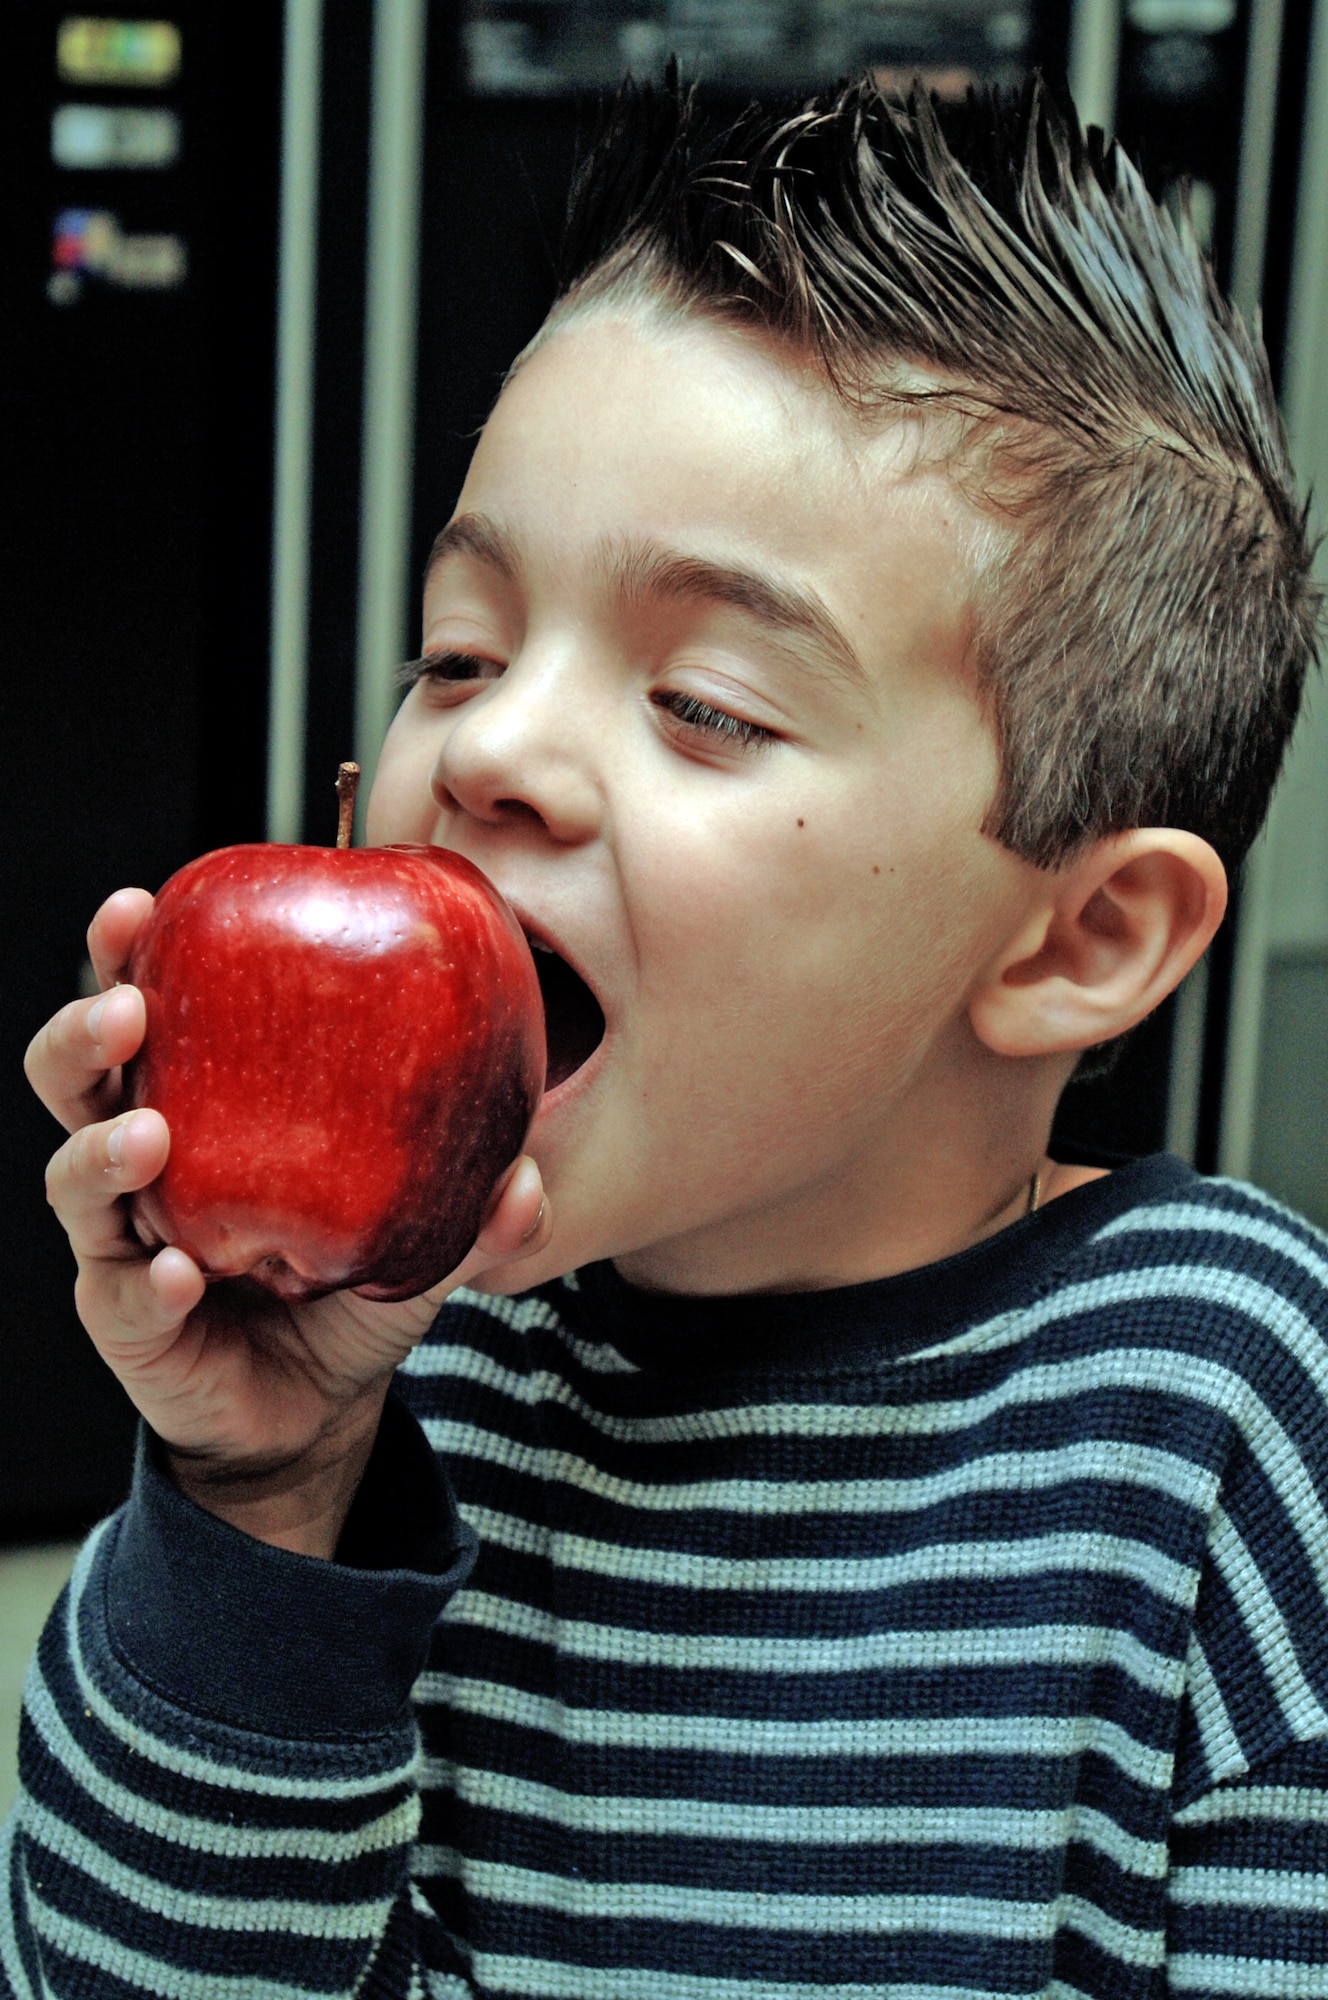 Angel Cuevas, son of Army Spc. Ana Cuevas from the Institute of Surgical Research at Fort Sam Houston, Texas, enjoys an apple at the Wilford Hall Medical Center Feb. 25, 2010, at Lackland Air Force Base, Texas. During National Nutrition Month, Airmen are encouraged to take time to assess their eating habits and how healthy eating habits are taught to children. (U.S. Air Force photo/Senior Airman Nicole Roberts)